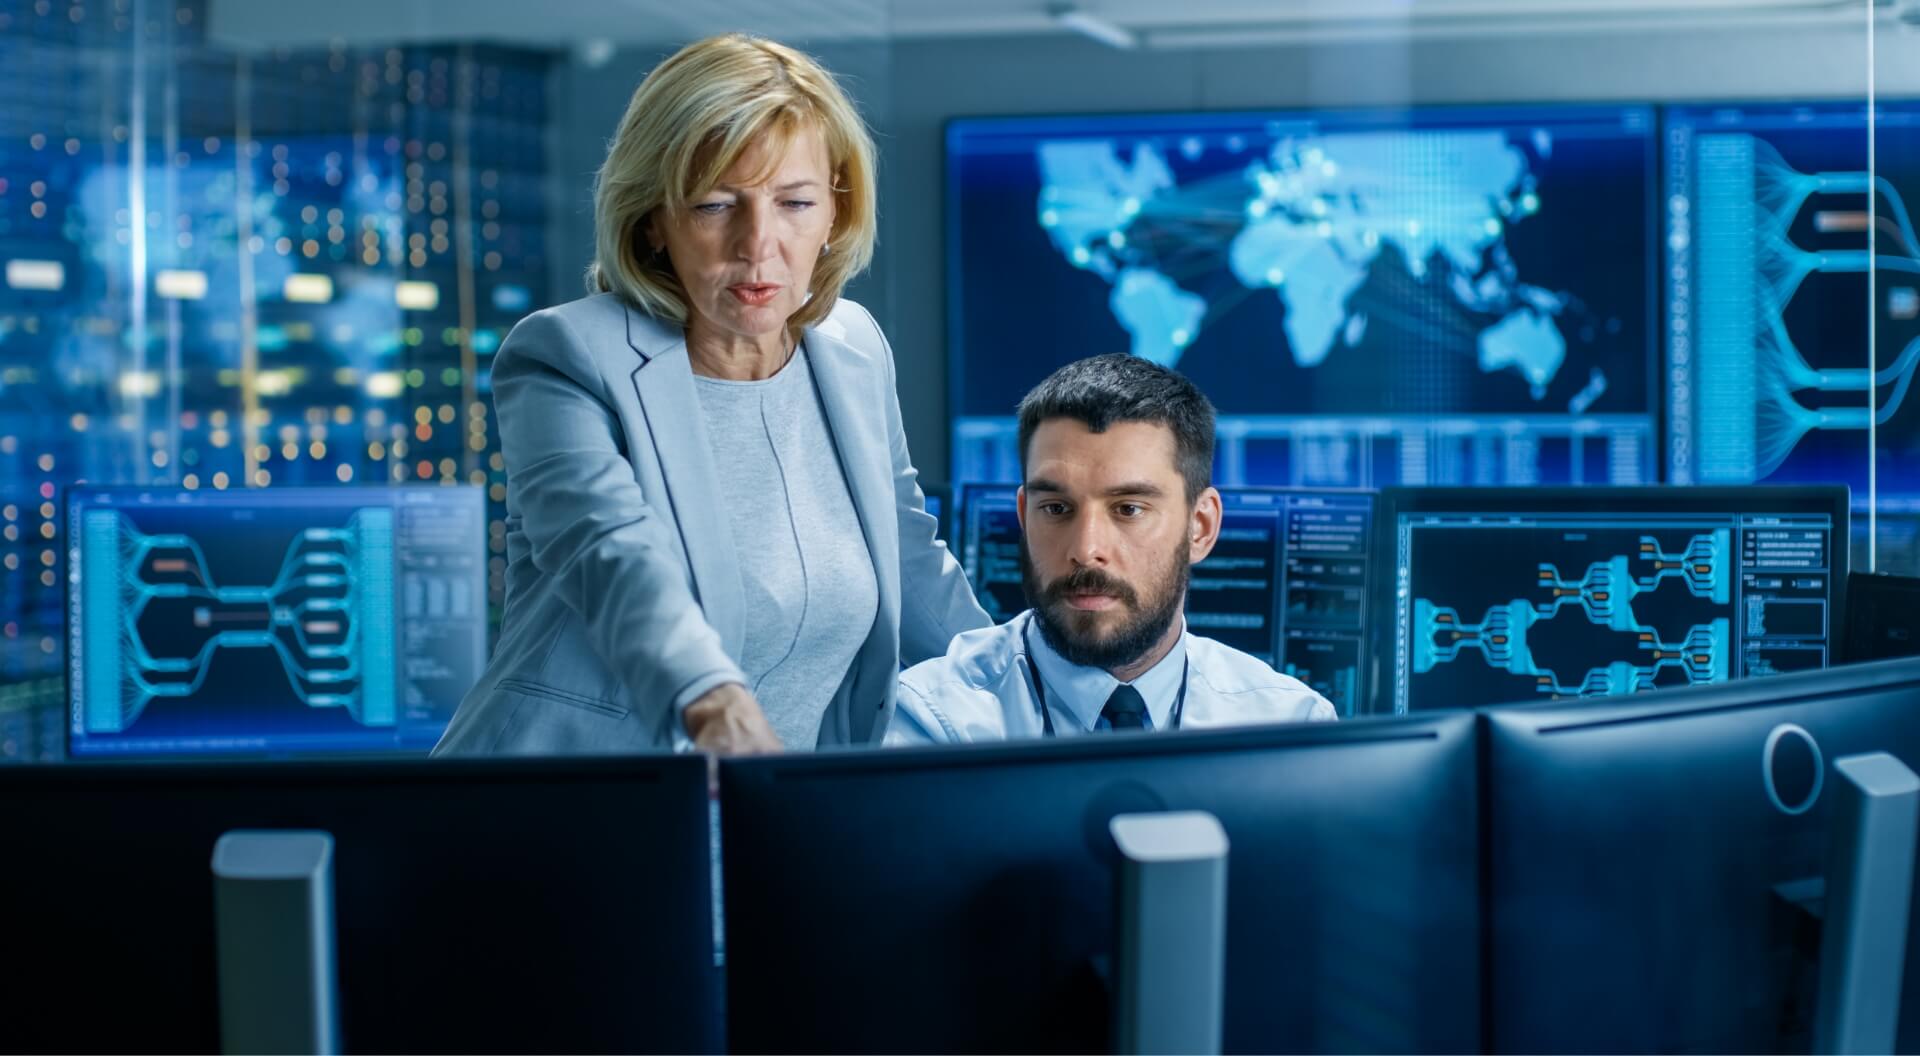 woman providing direction to male counterpart behind computer monitors in command center environment 